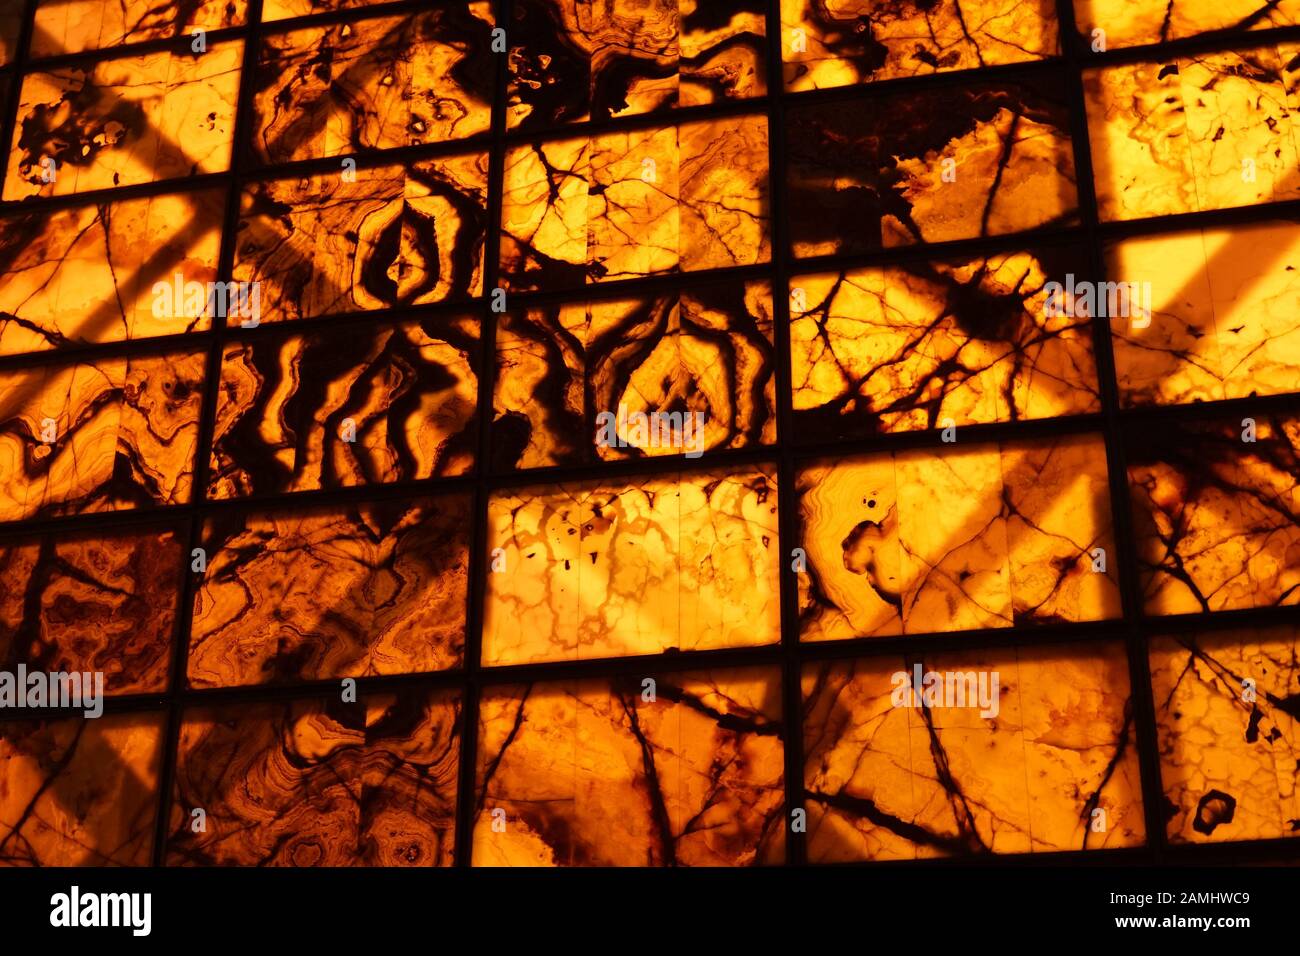 An abstract image of patterned sheet glass lit up Stock Photo